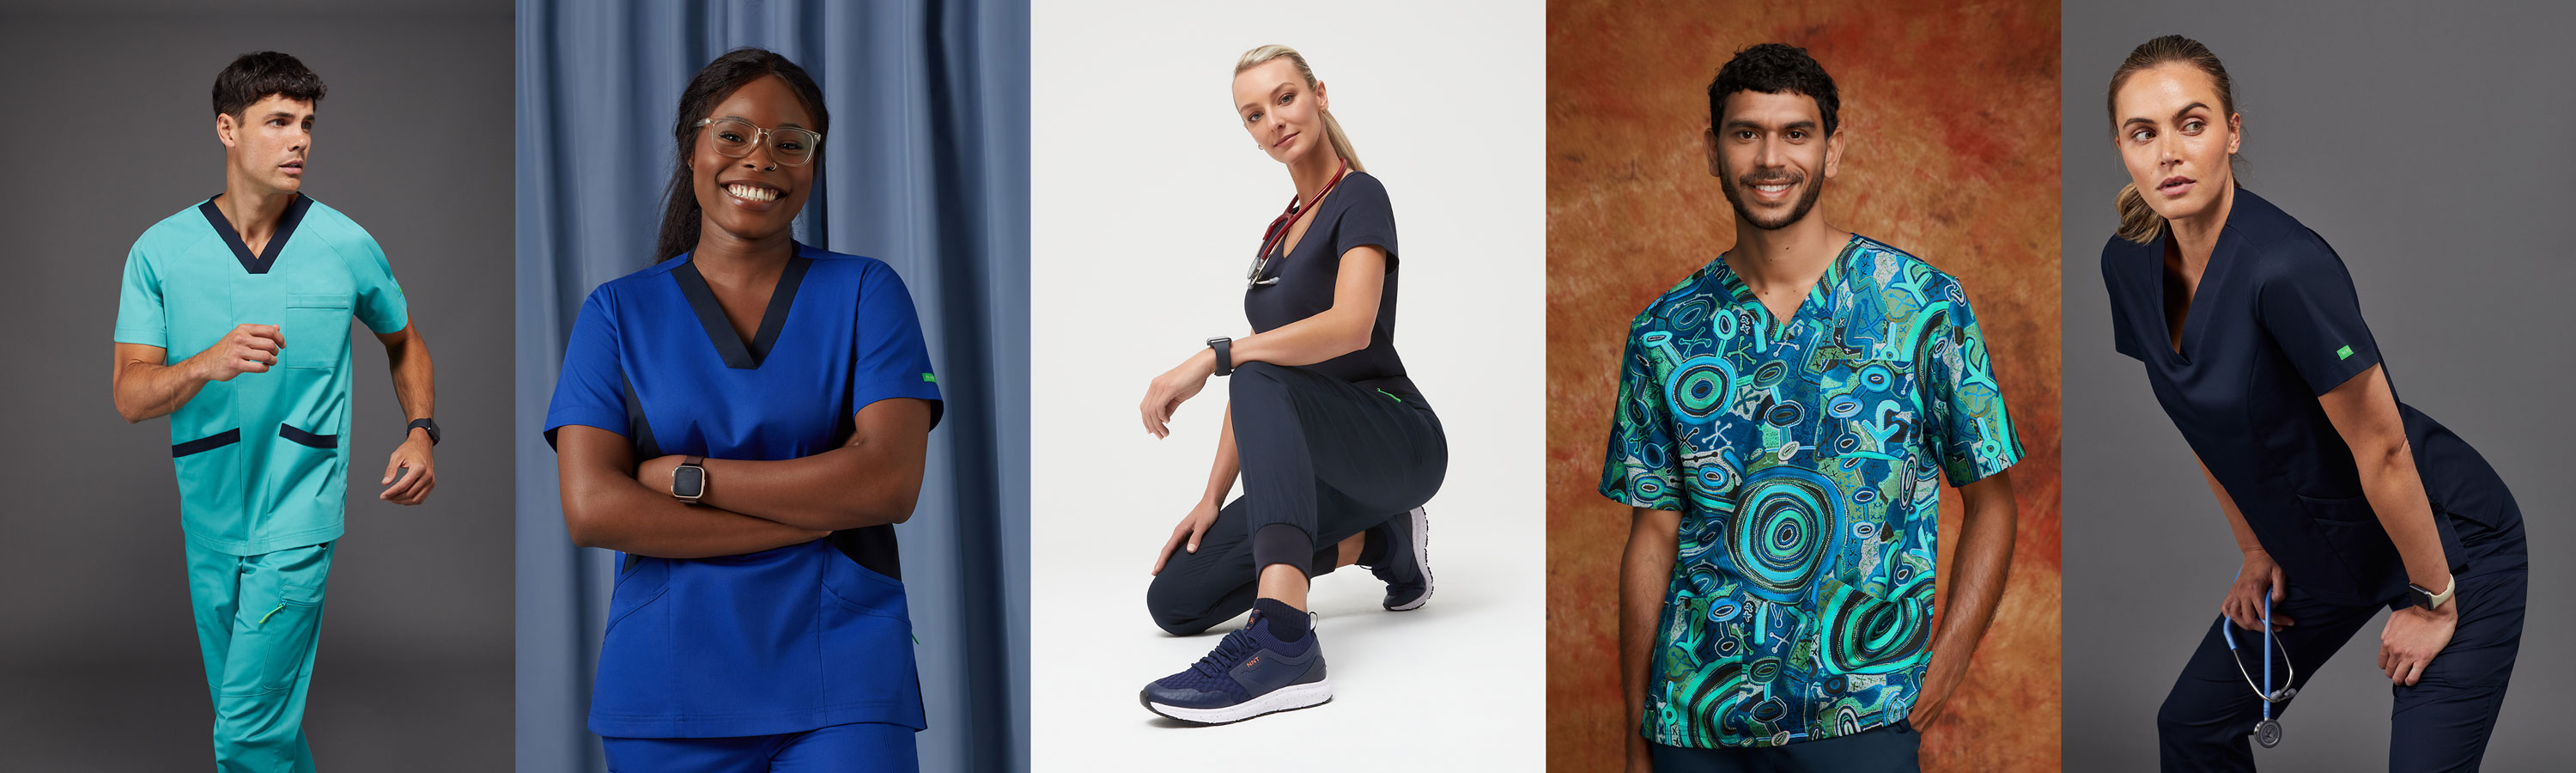 The latest designs in scrubs